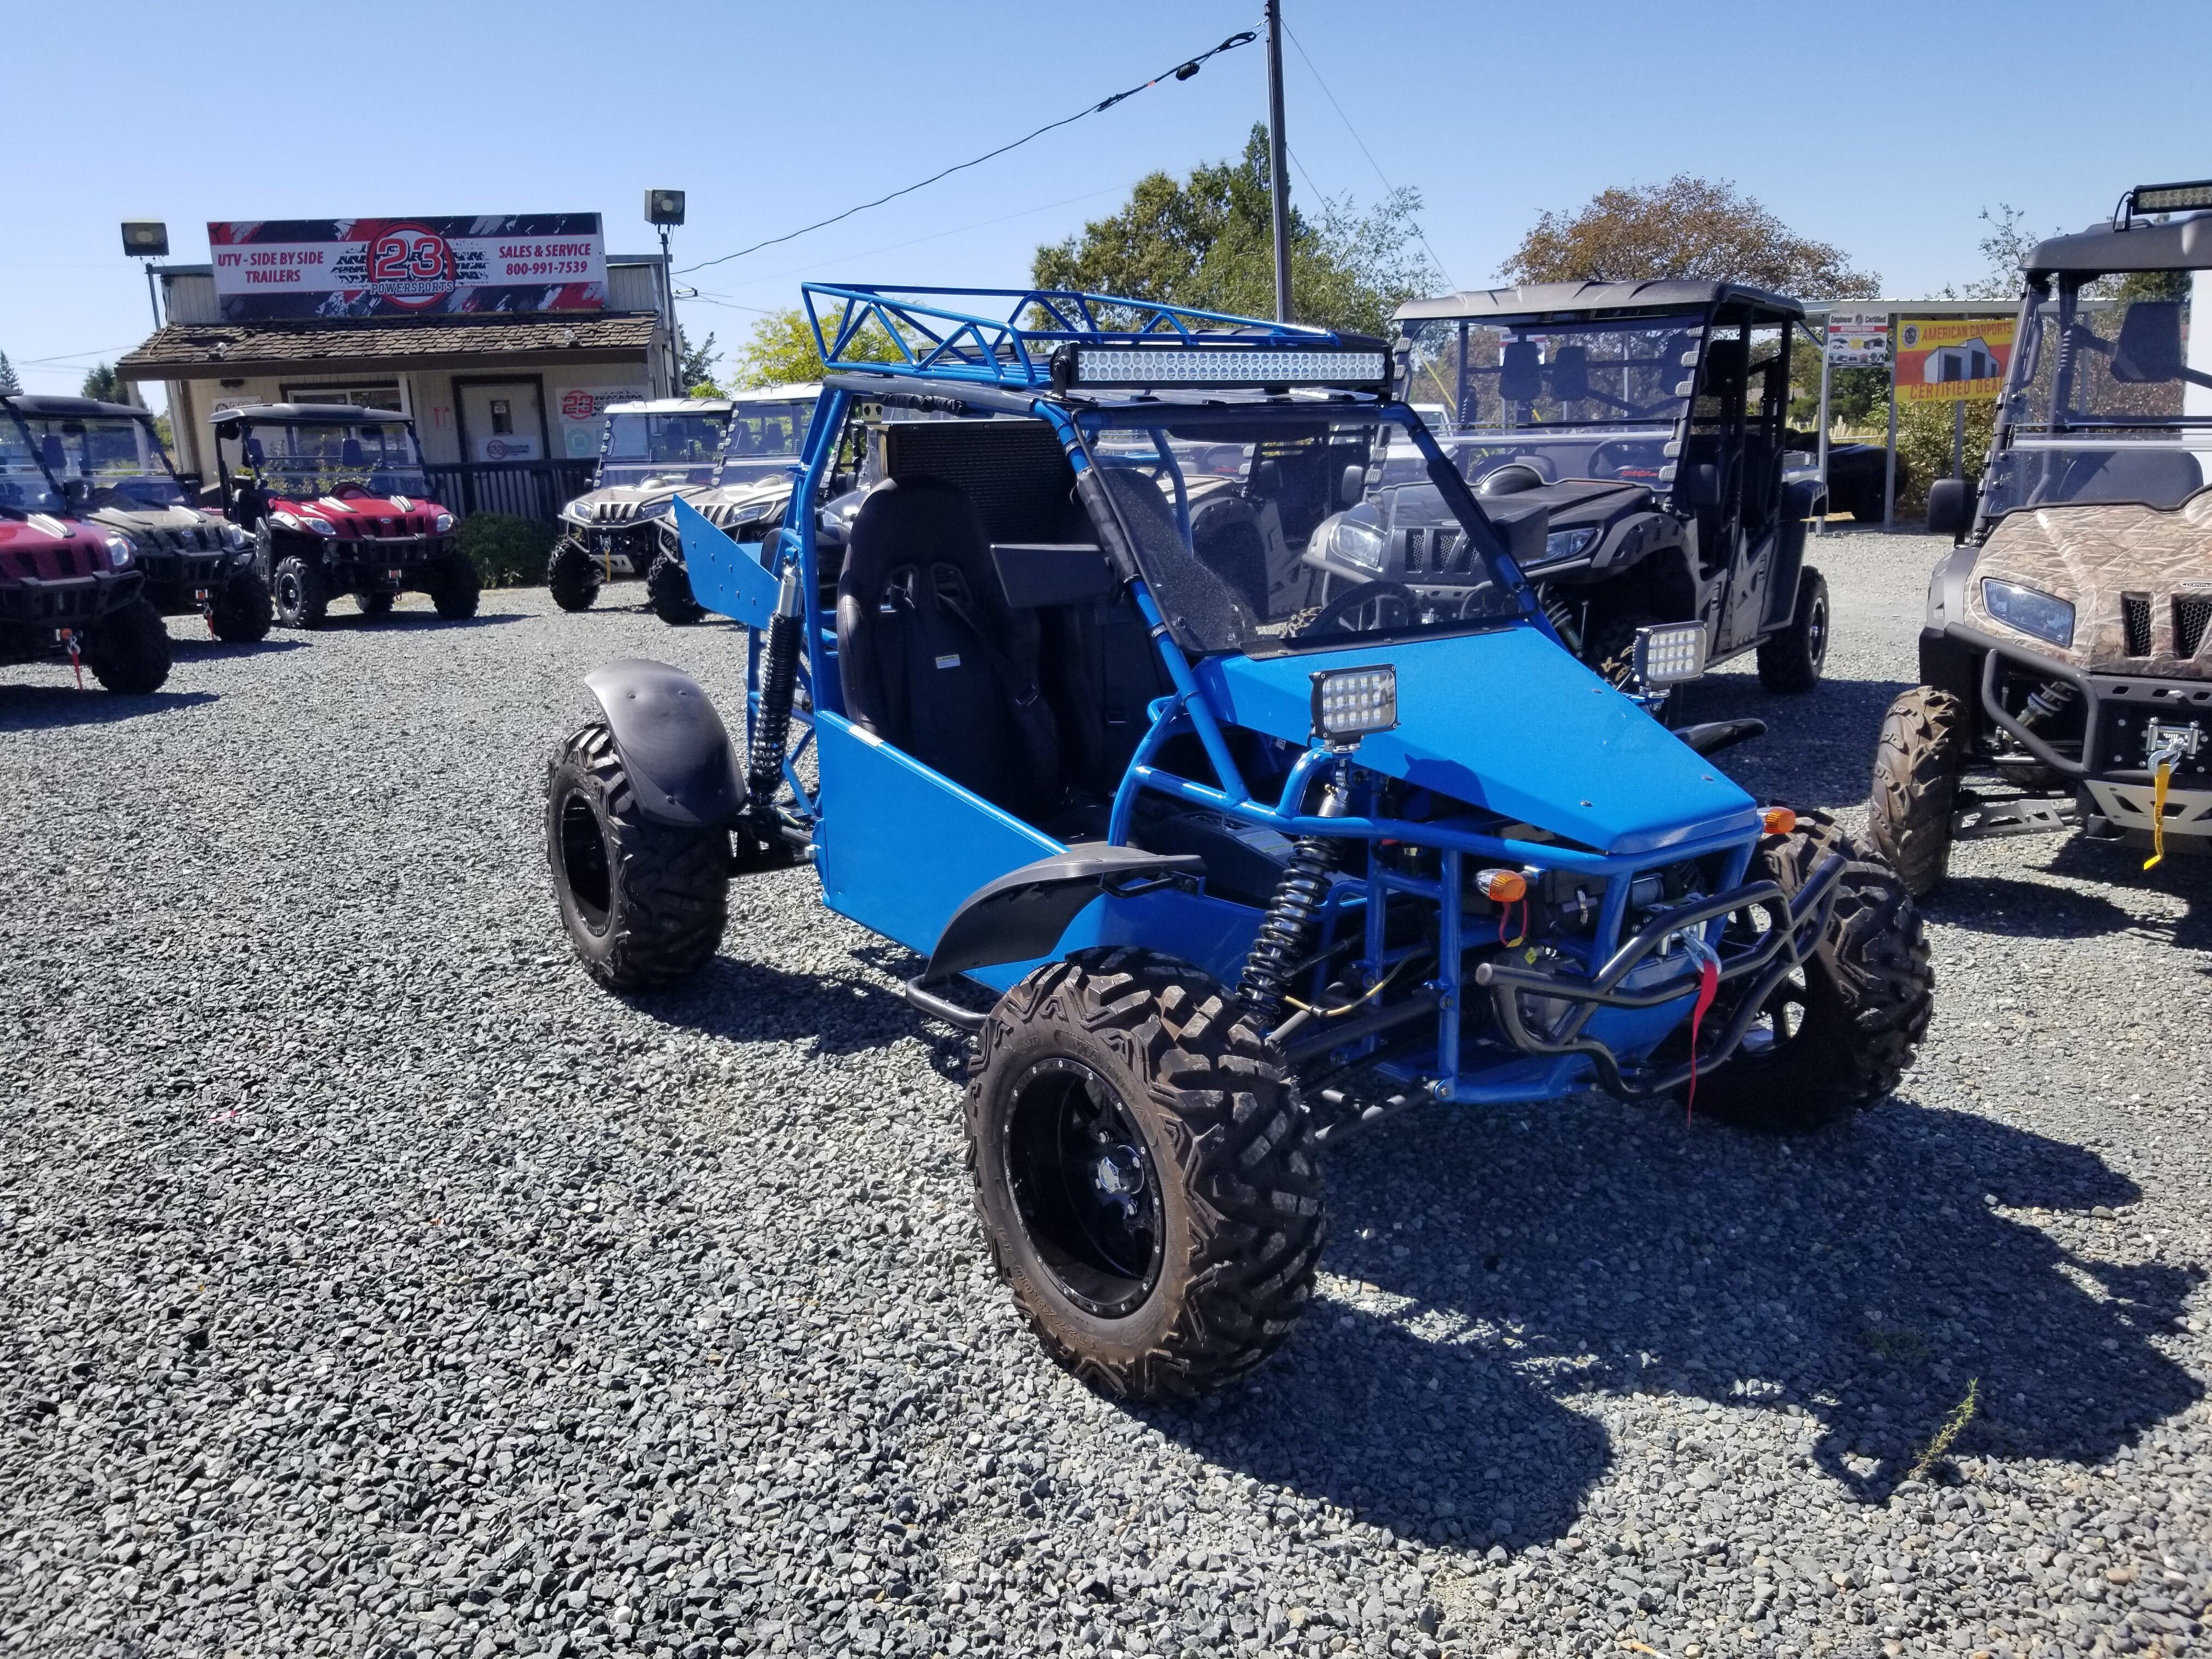 sxs racing buggy for sale